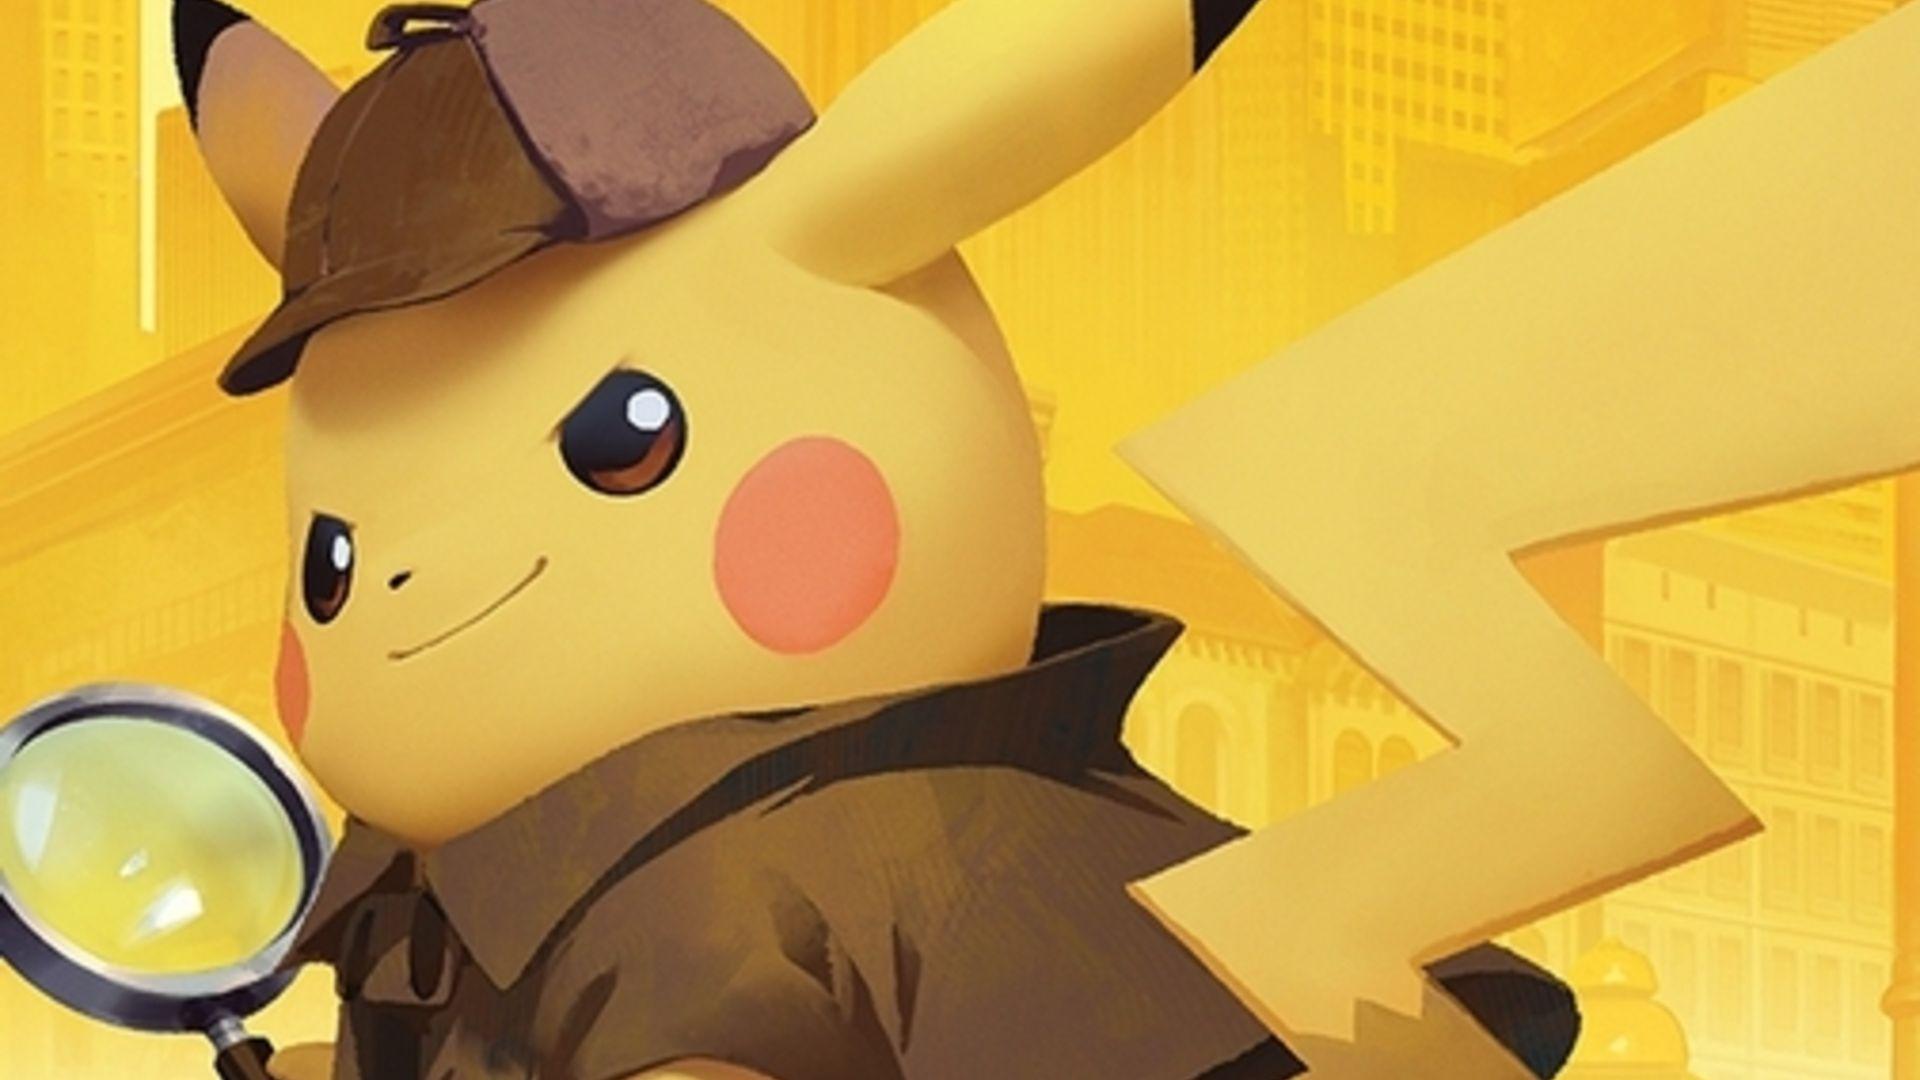 Rita Ora joins the cast of the upcoming Detective Pikachu movie